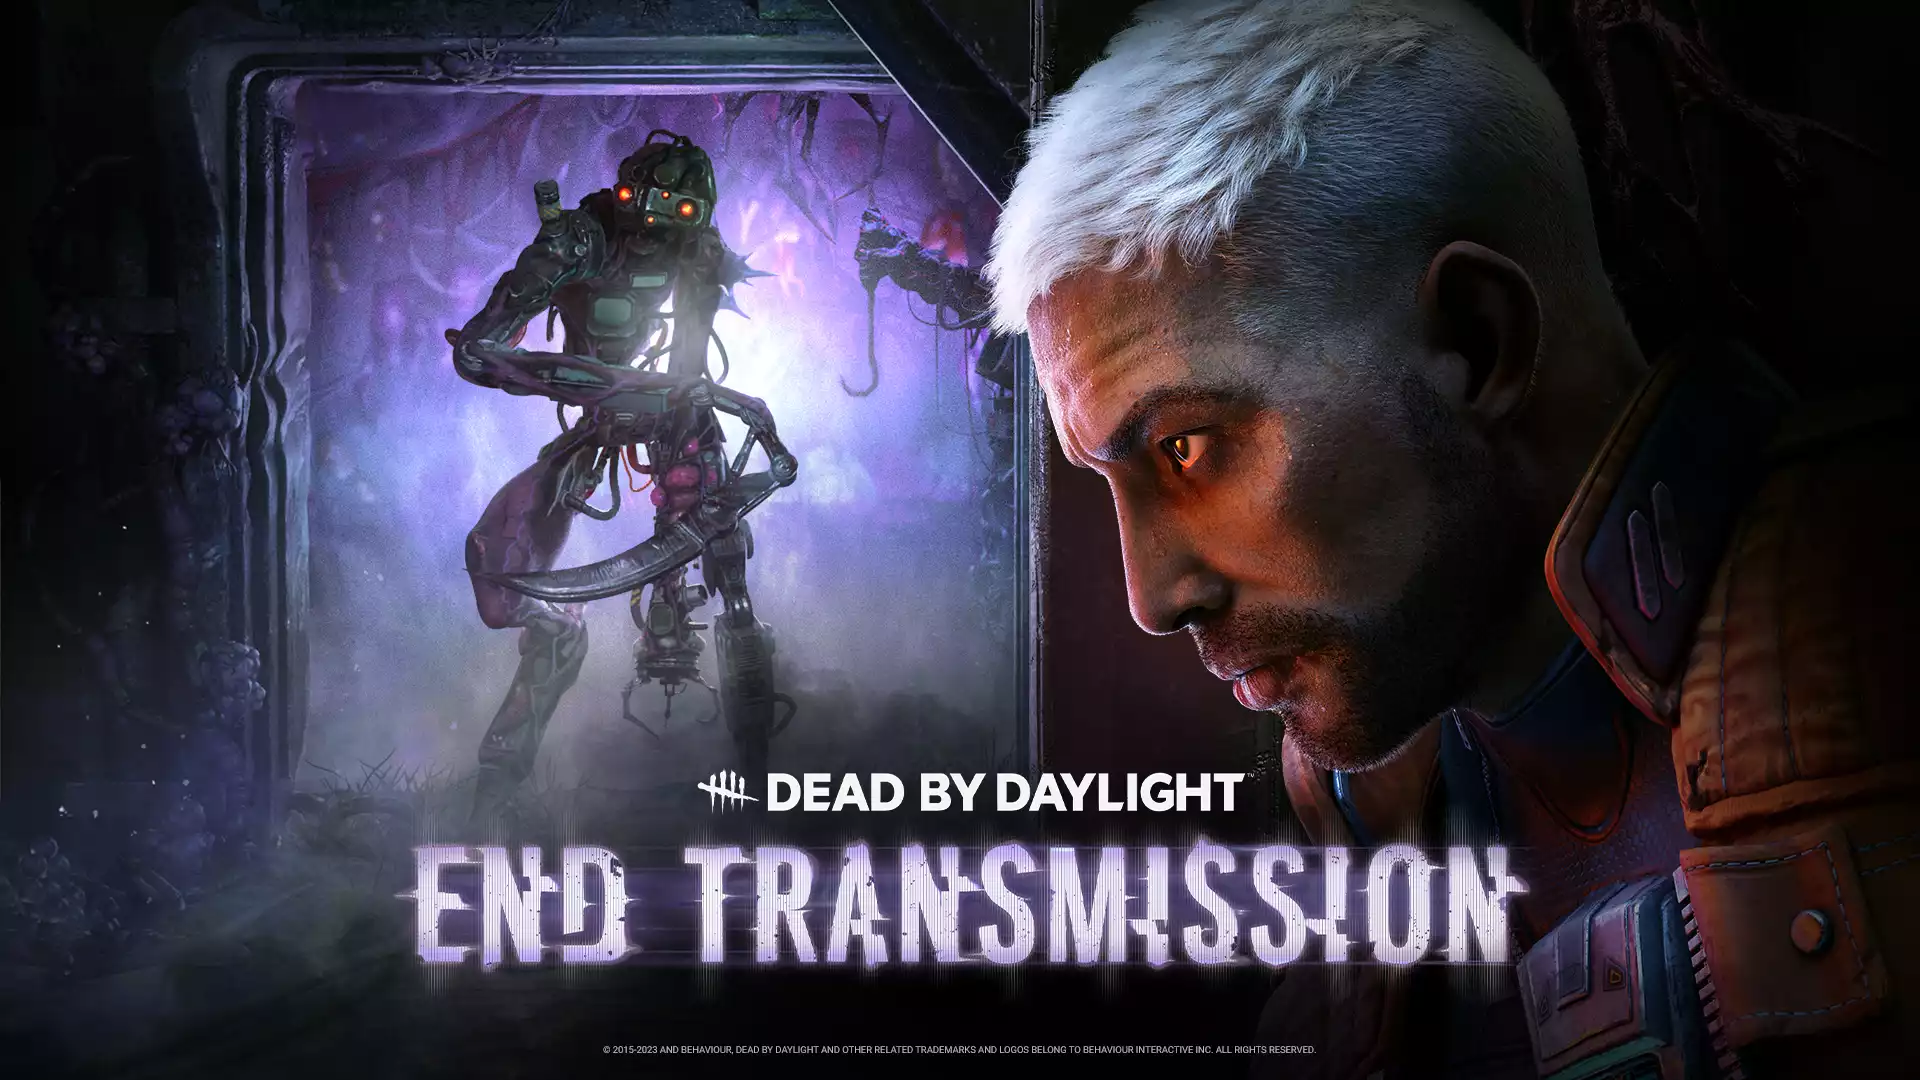 Dead by Daylight update 7.0.0. patch notes: Search bar, End Transmission & Perk changes